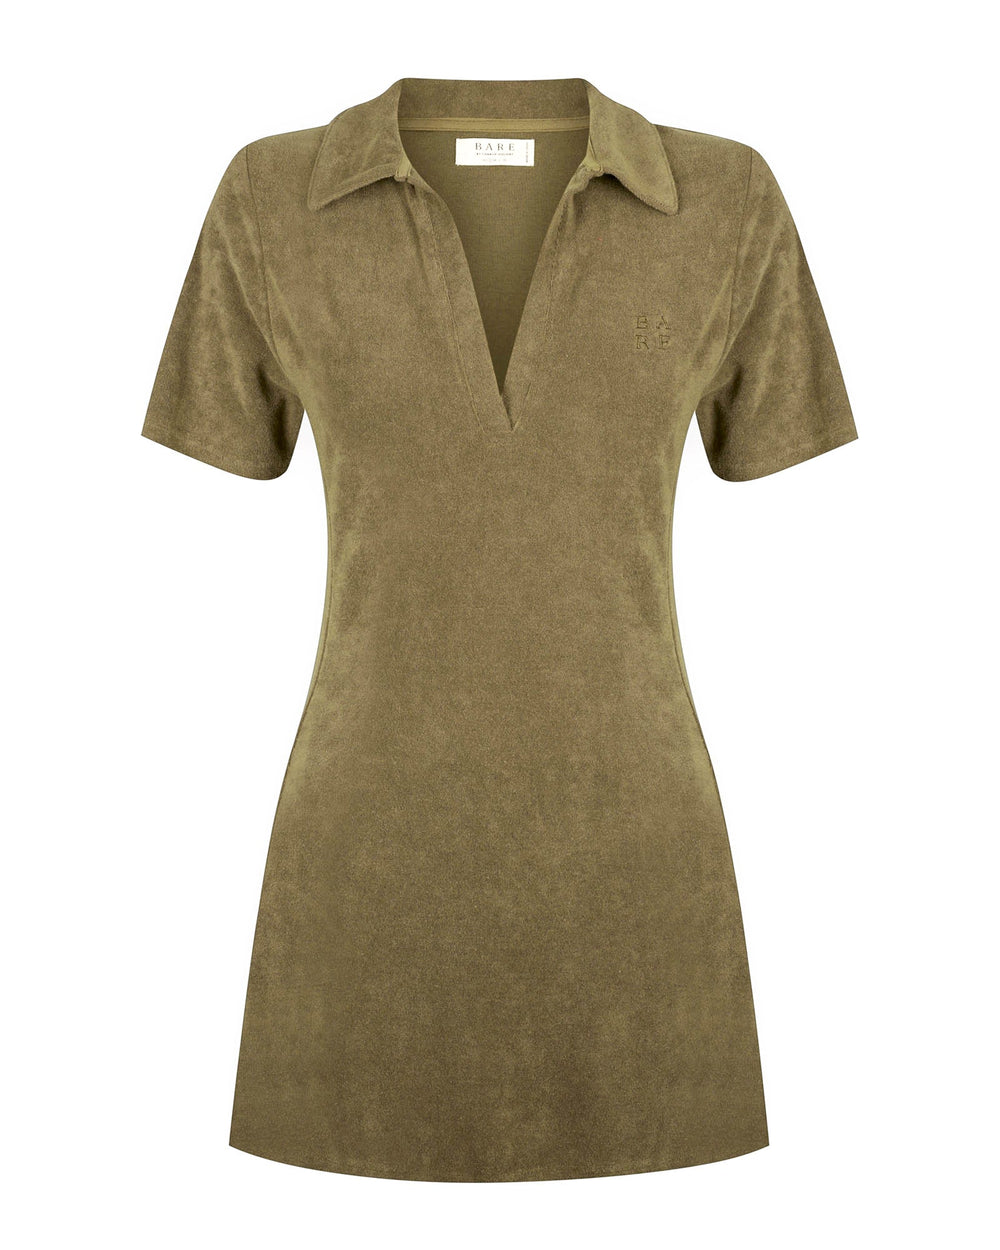 The Terry Towelling Dress